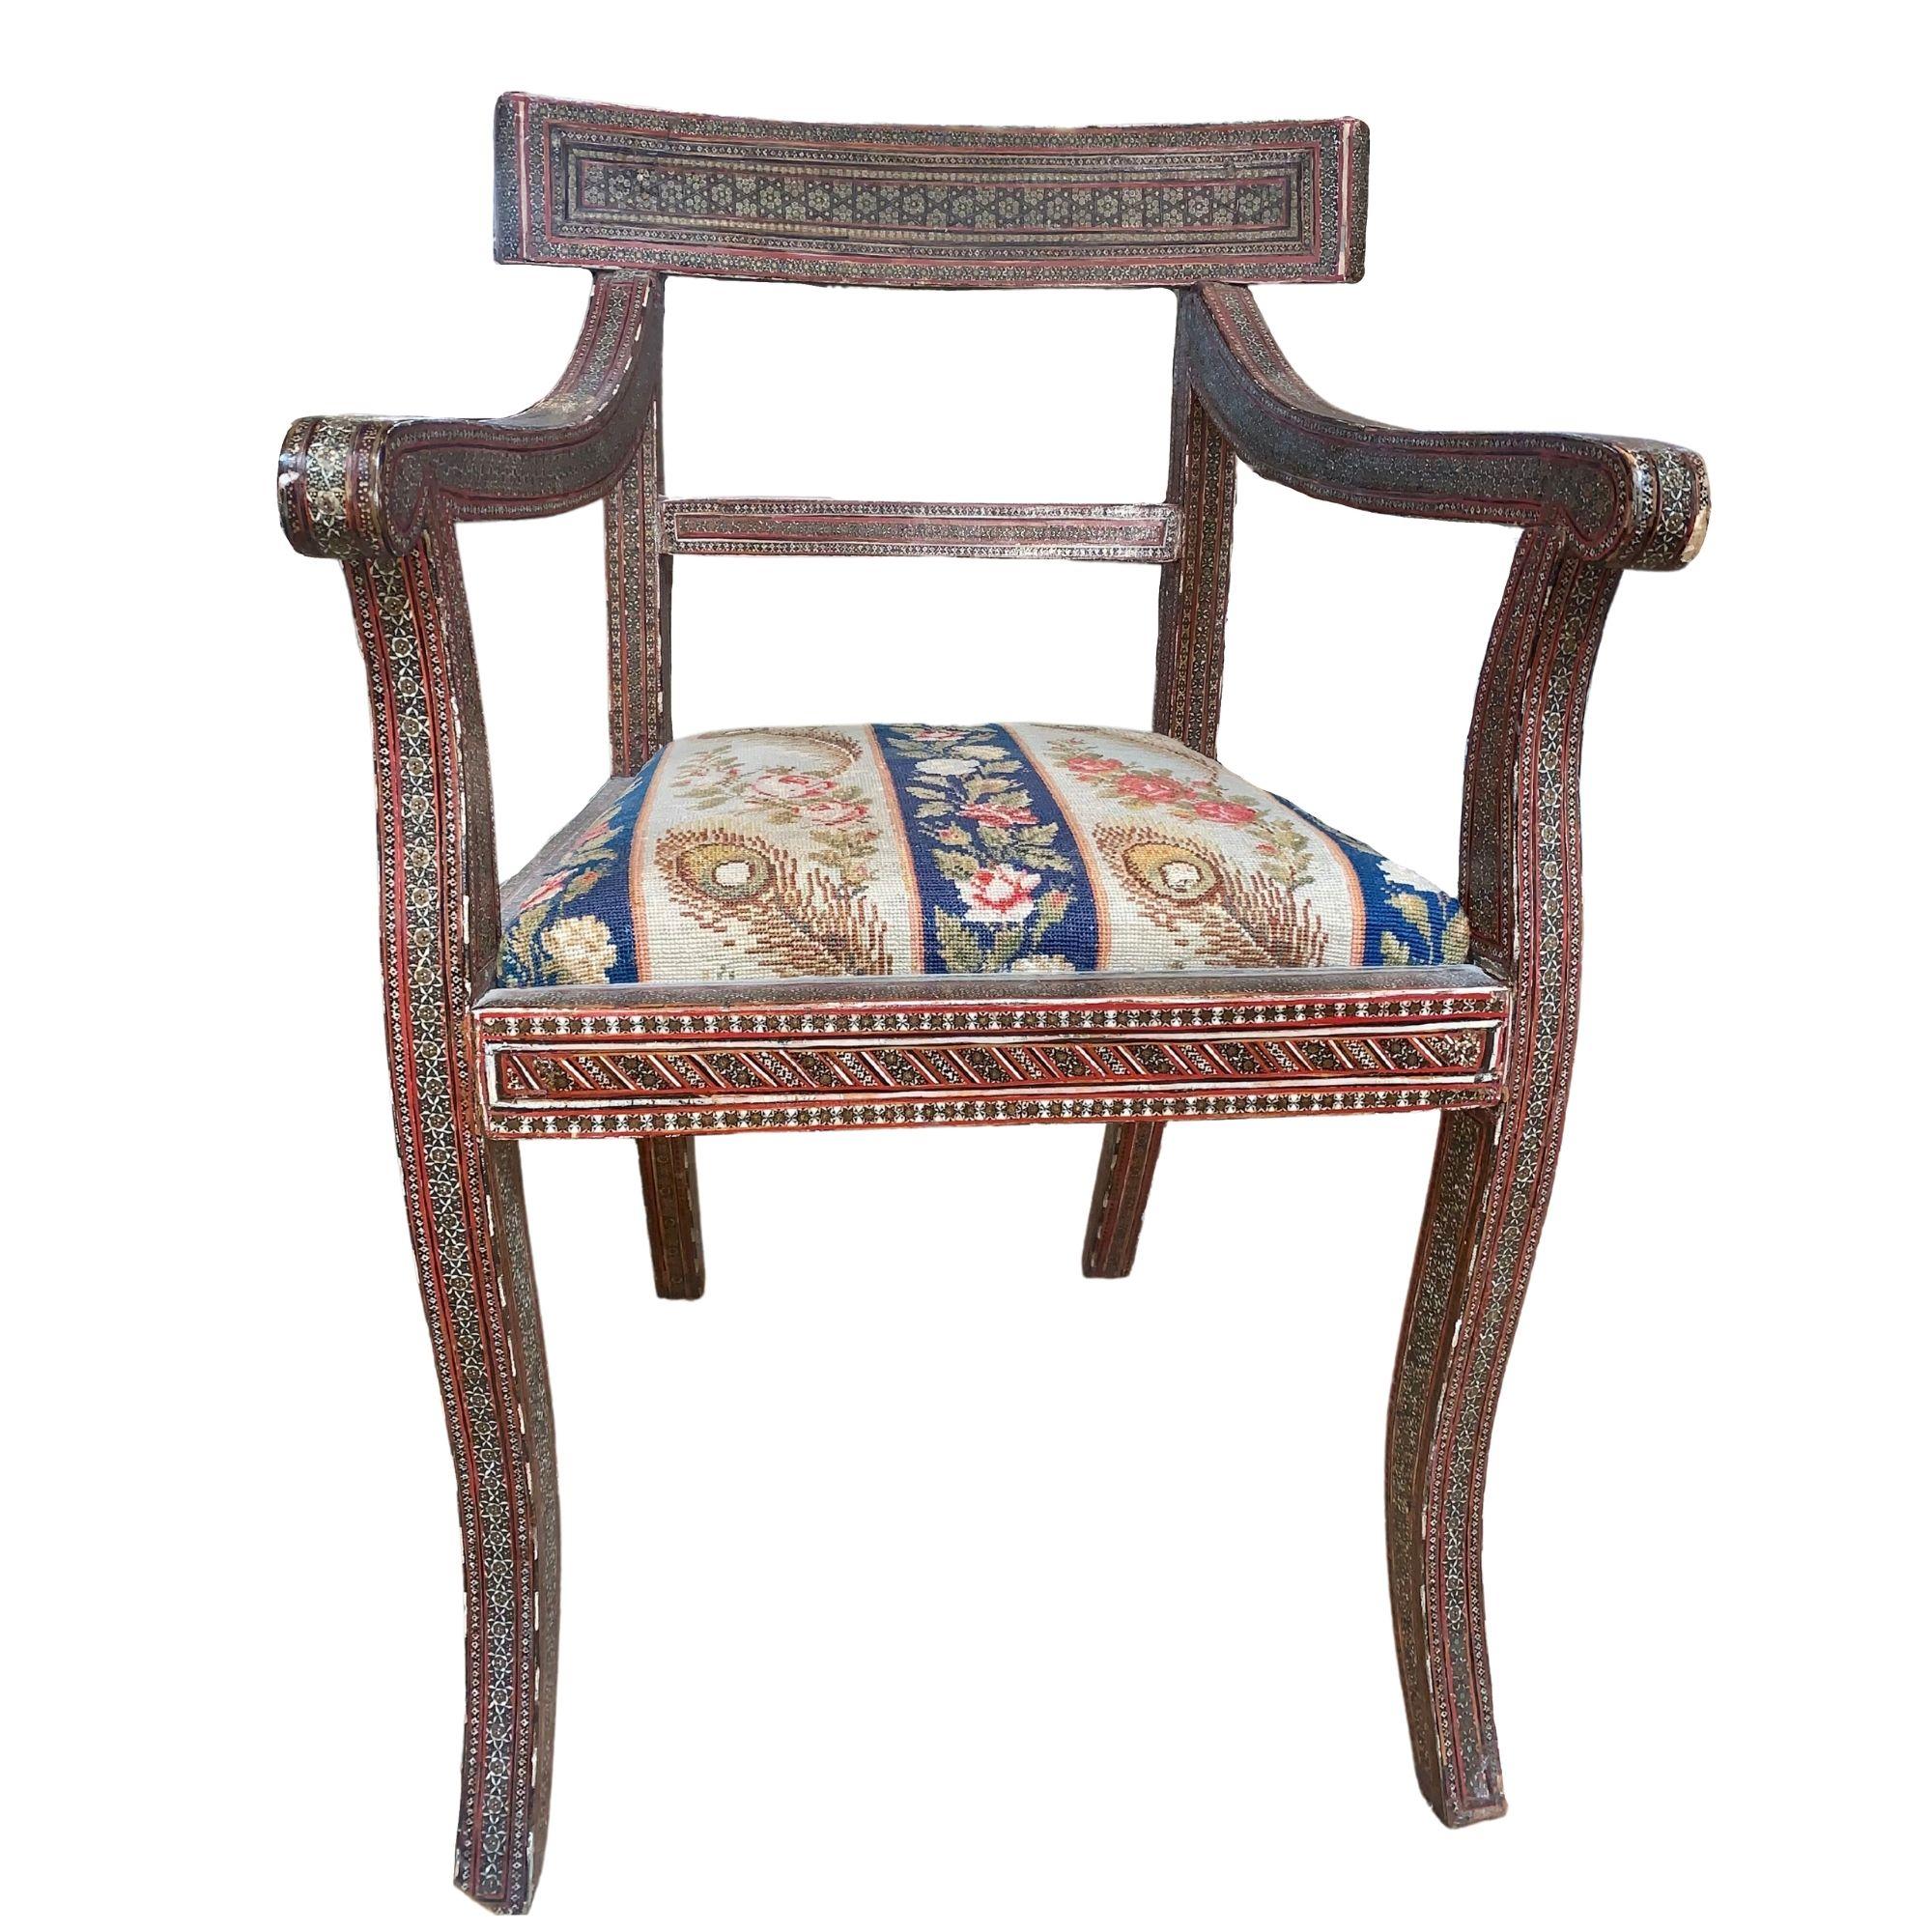 Antique Syrian chair with beautiful inlay and old needlepoint cushion.